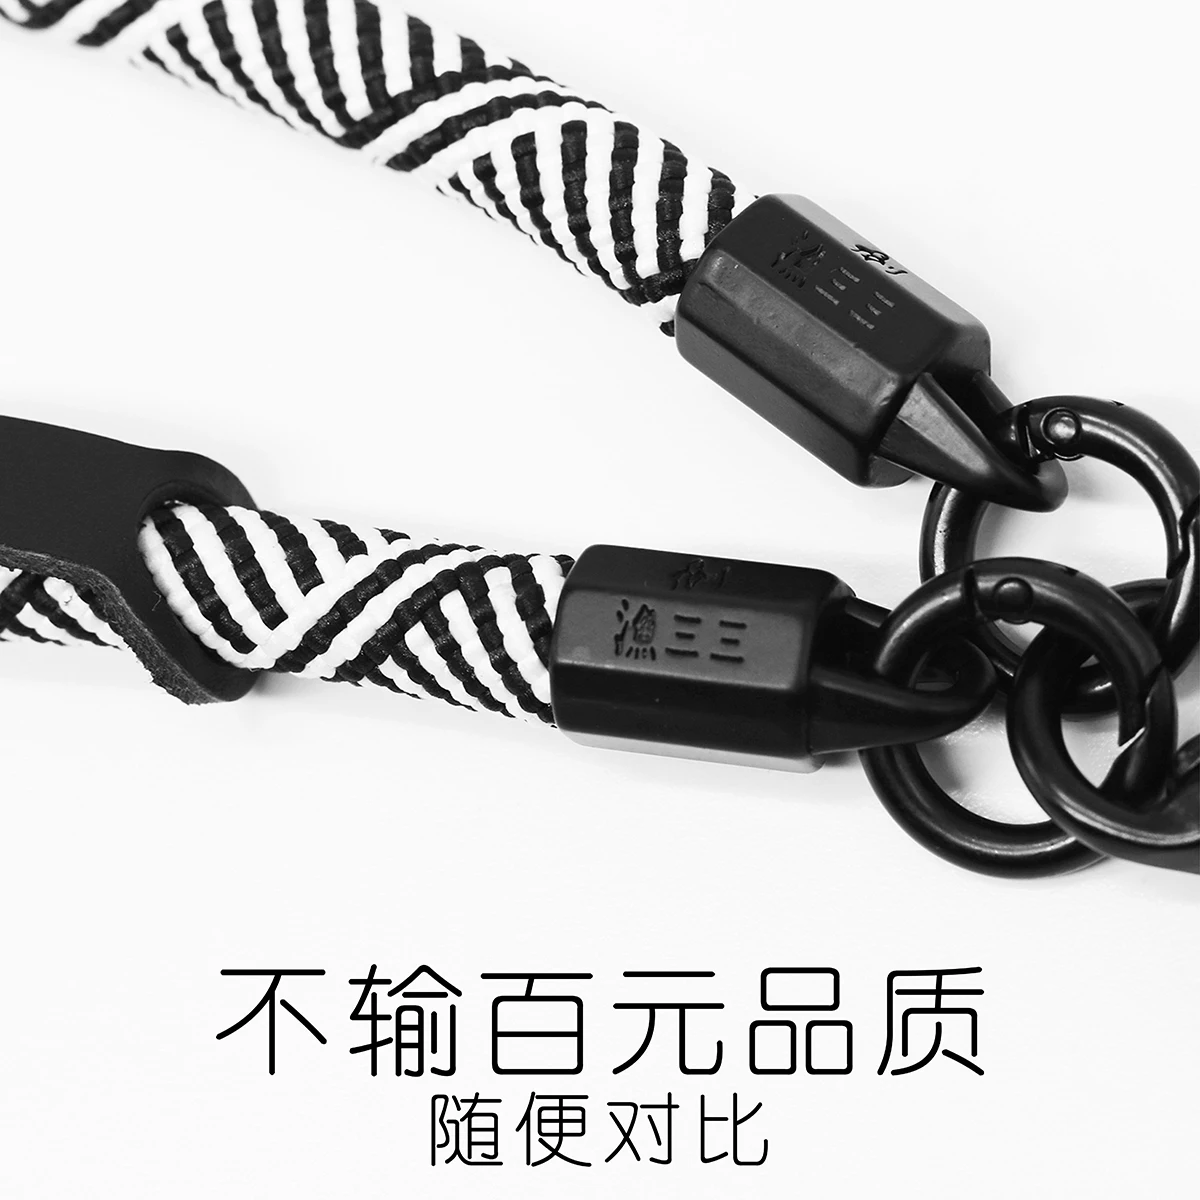 Multi Colors Cell Phone Neck Crossbody Lanyard Universal Phone Strap Connector For Most Mobile Phone